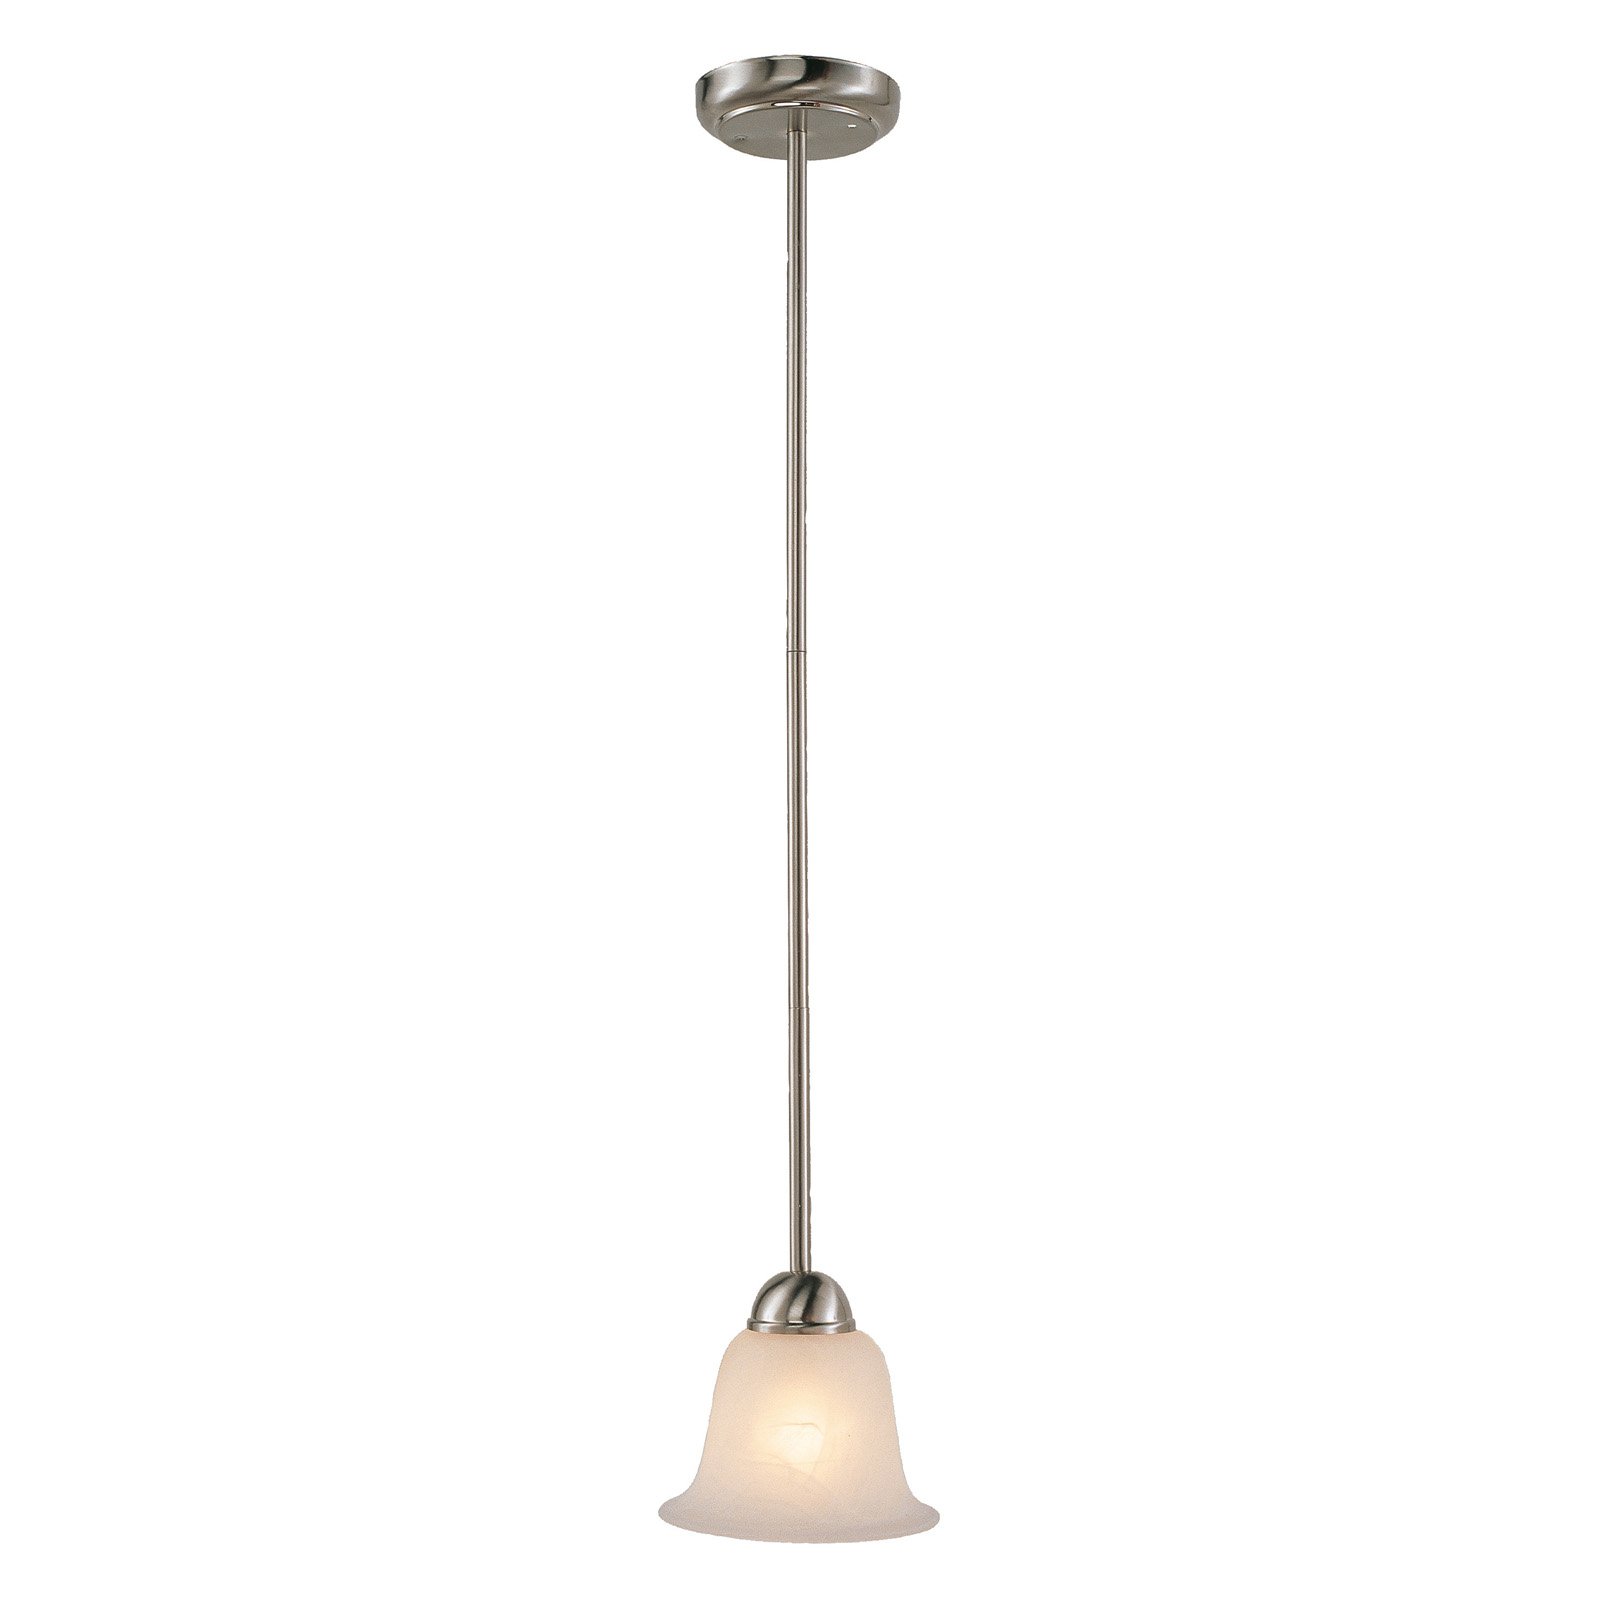 Transglobe 9282 Drop Pendant - 6.5W in. - image 1 of 2